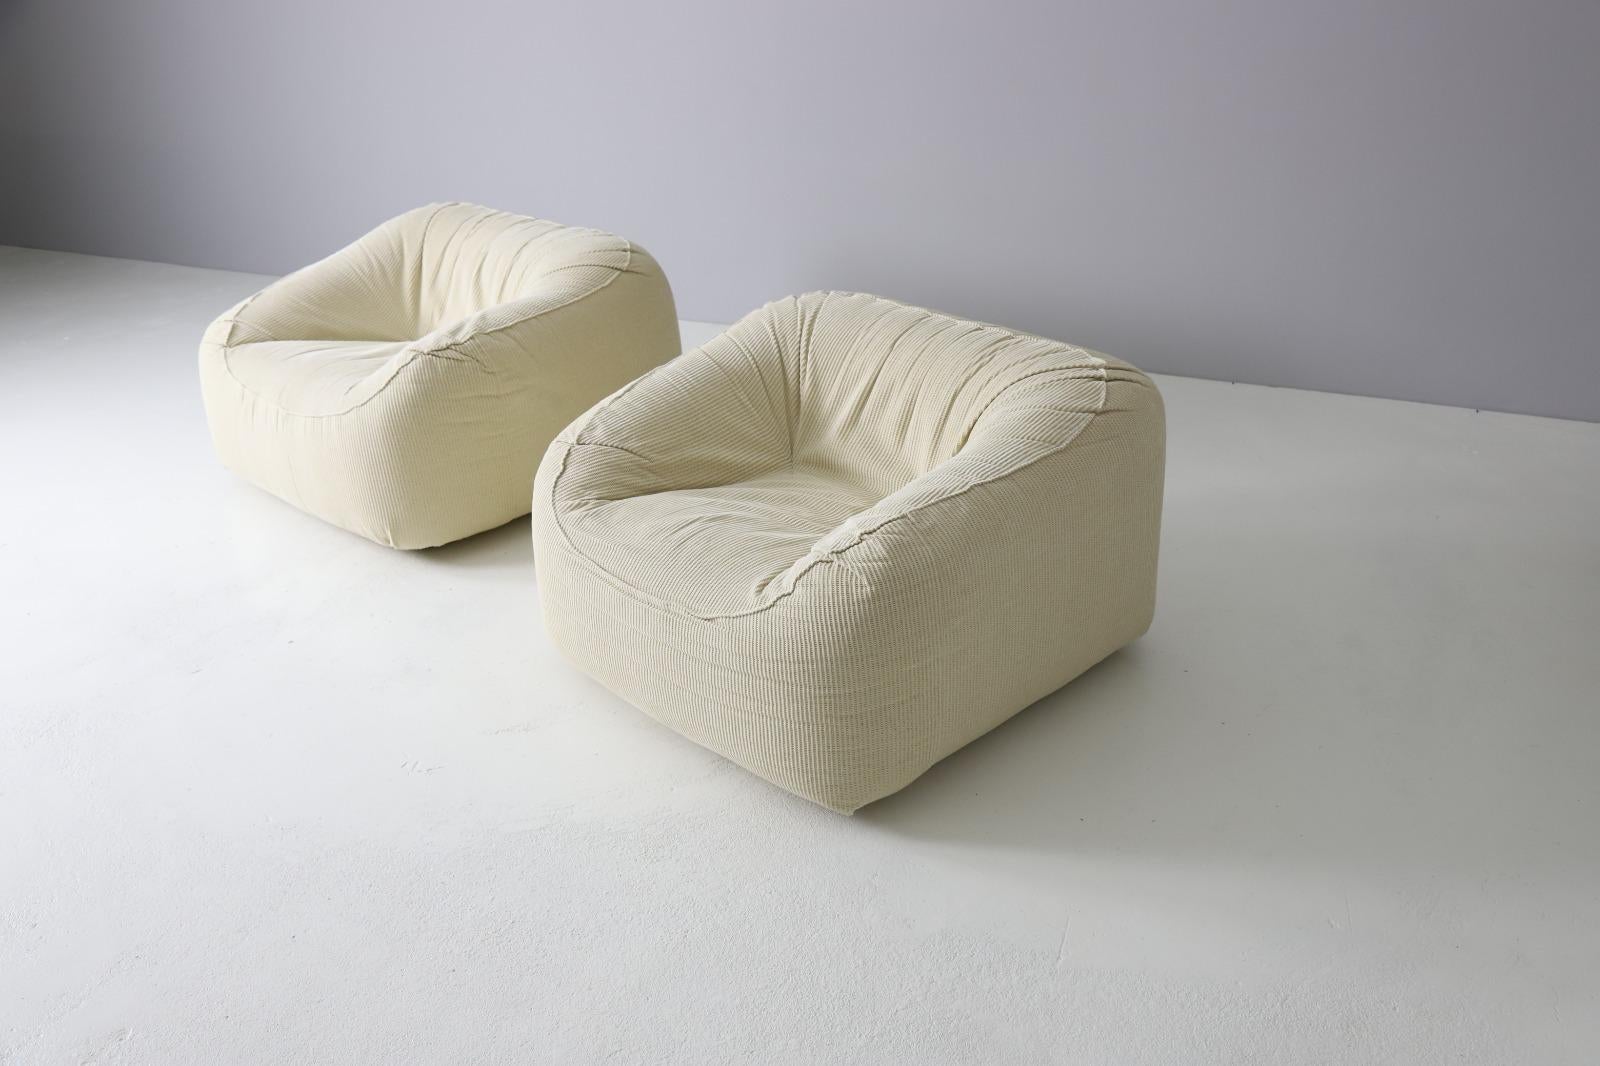 Pair of oversized Italian lounge chairs from the late 1970s. All in very good original condition. The moulded foam base makes it super comfortable. 
Original fabric with minimal wear of use and age.